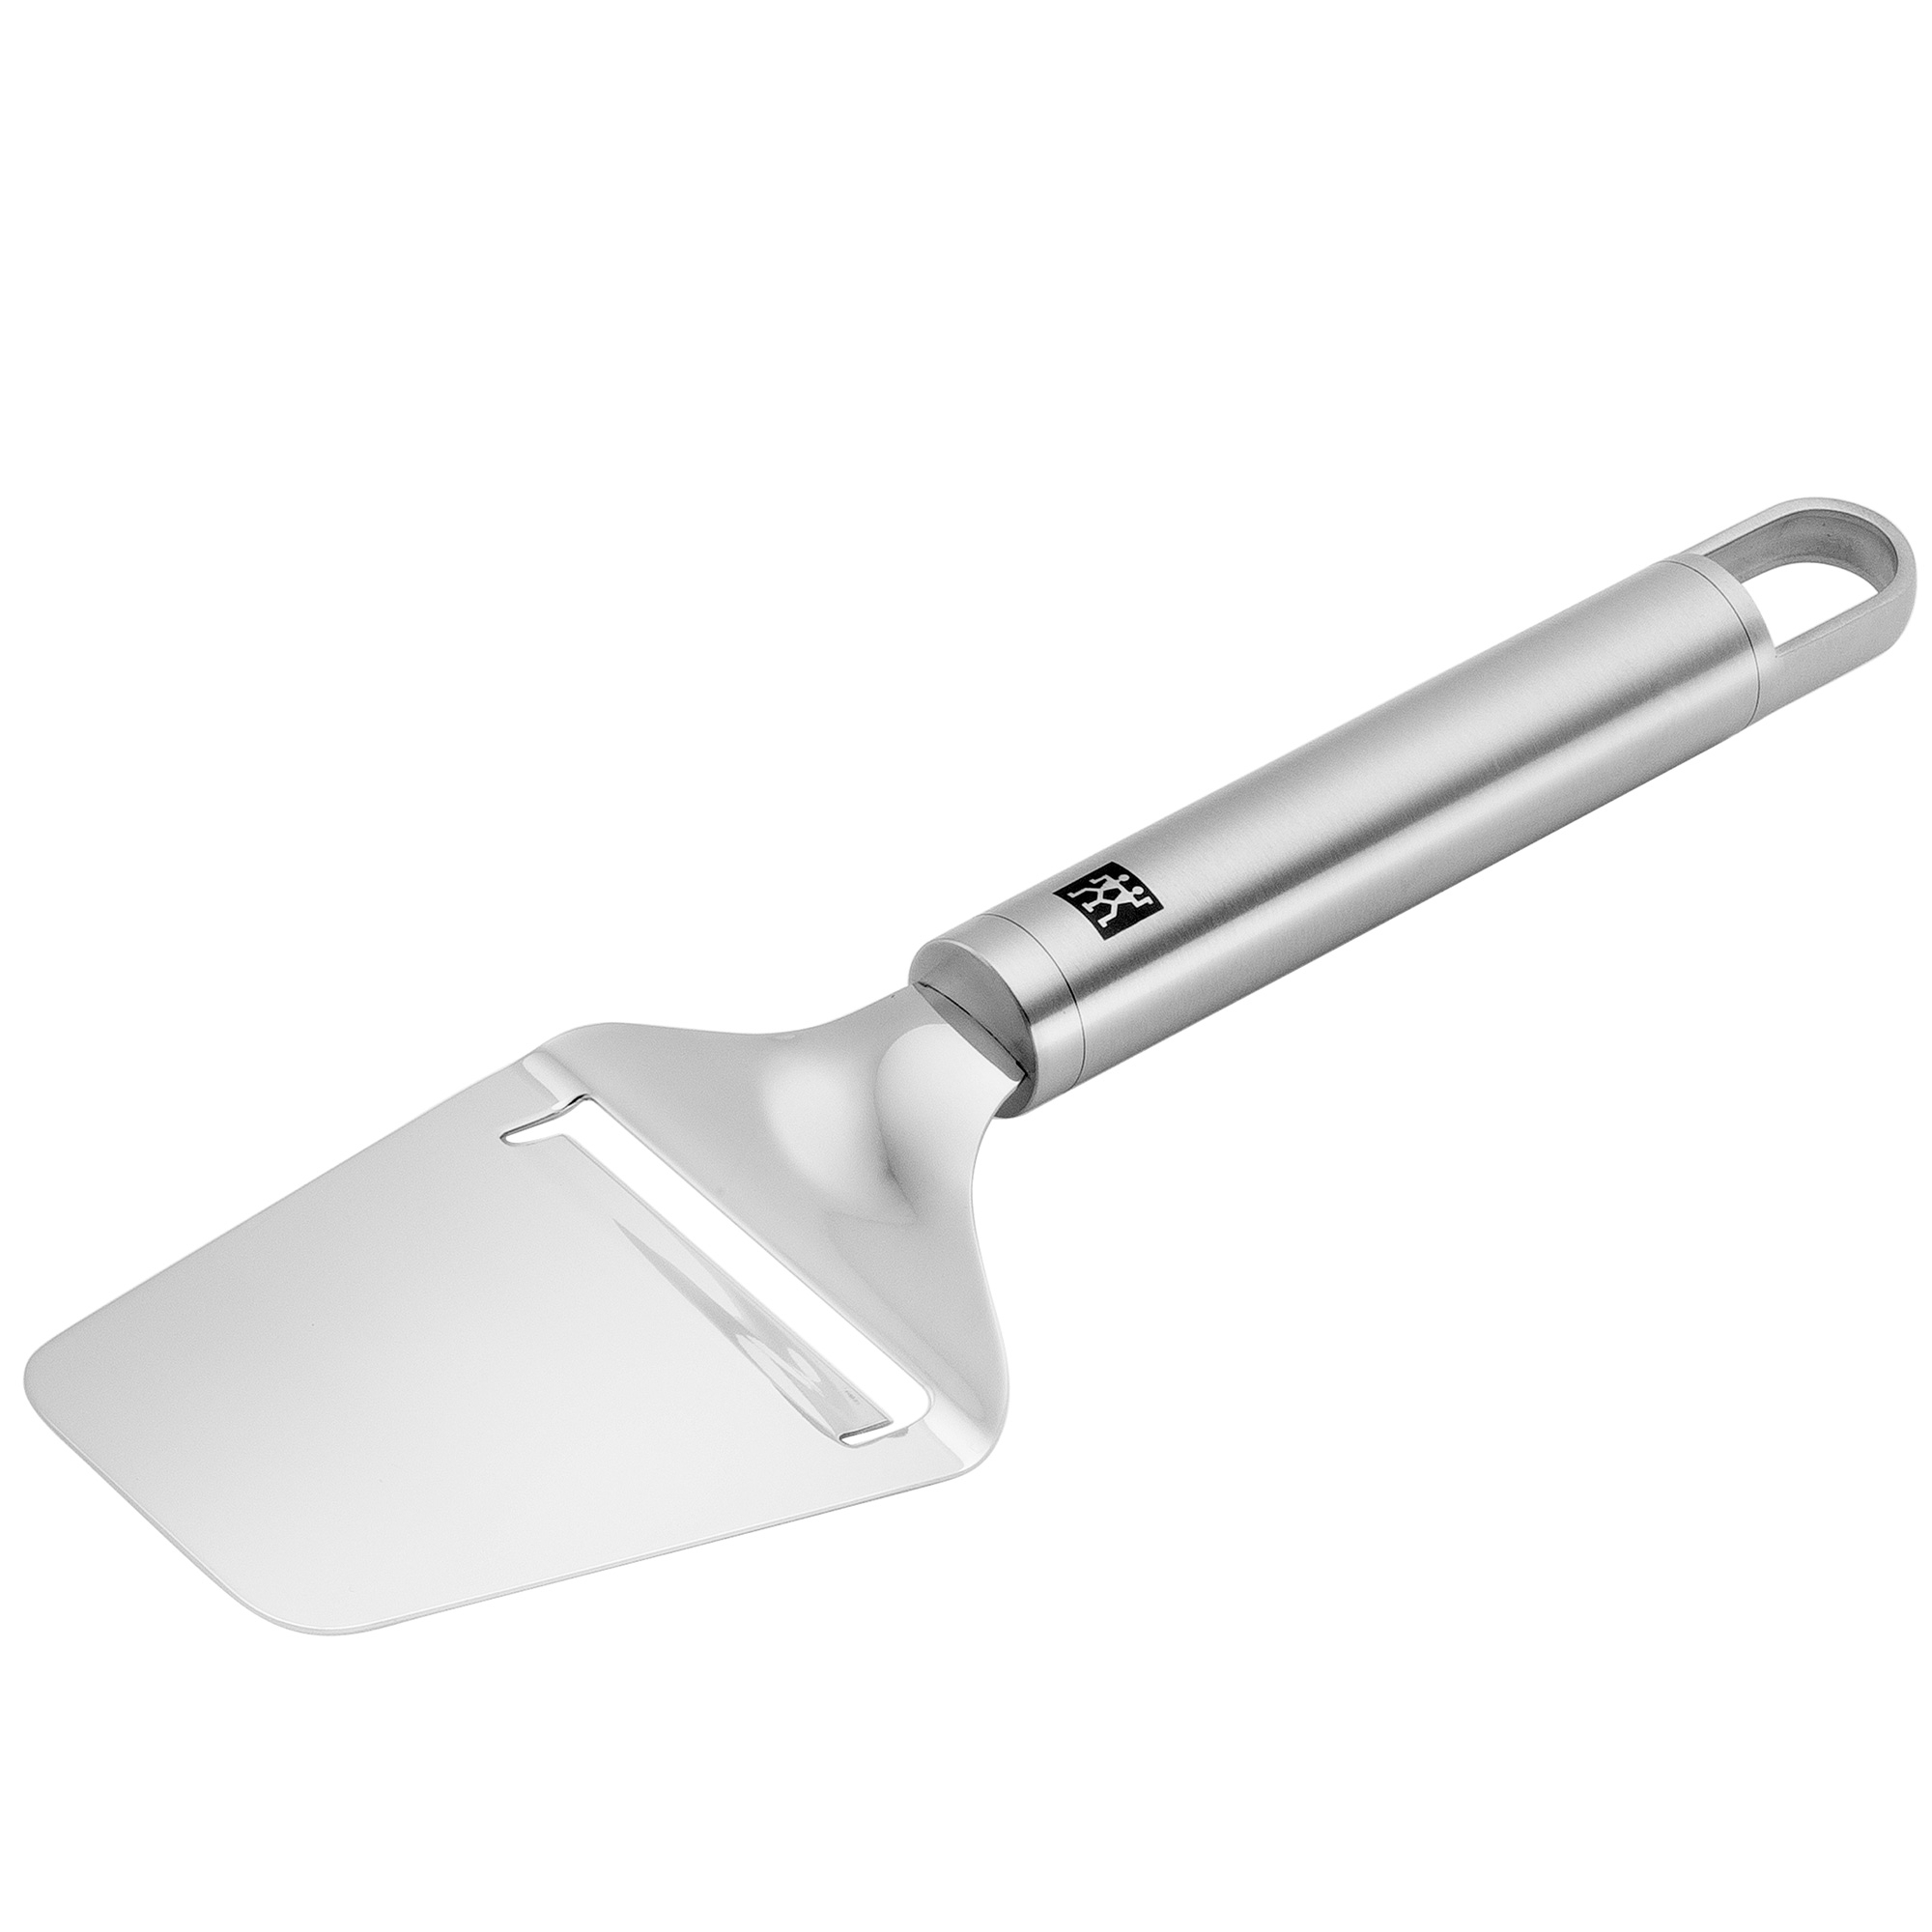 Zwilling - Pro - Cheese slicer